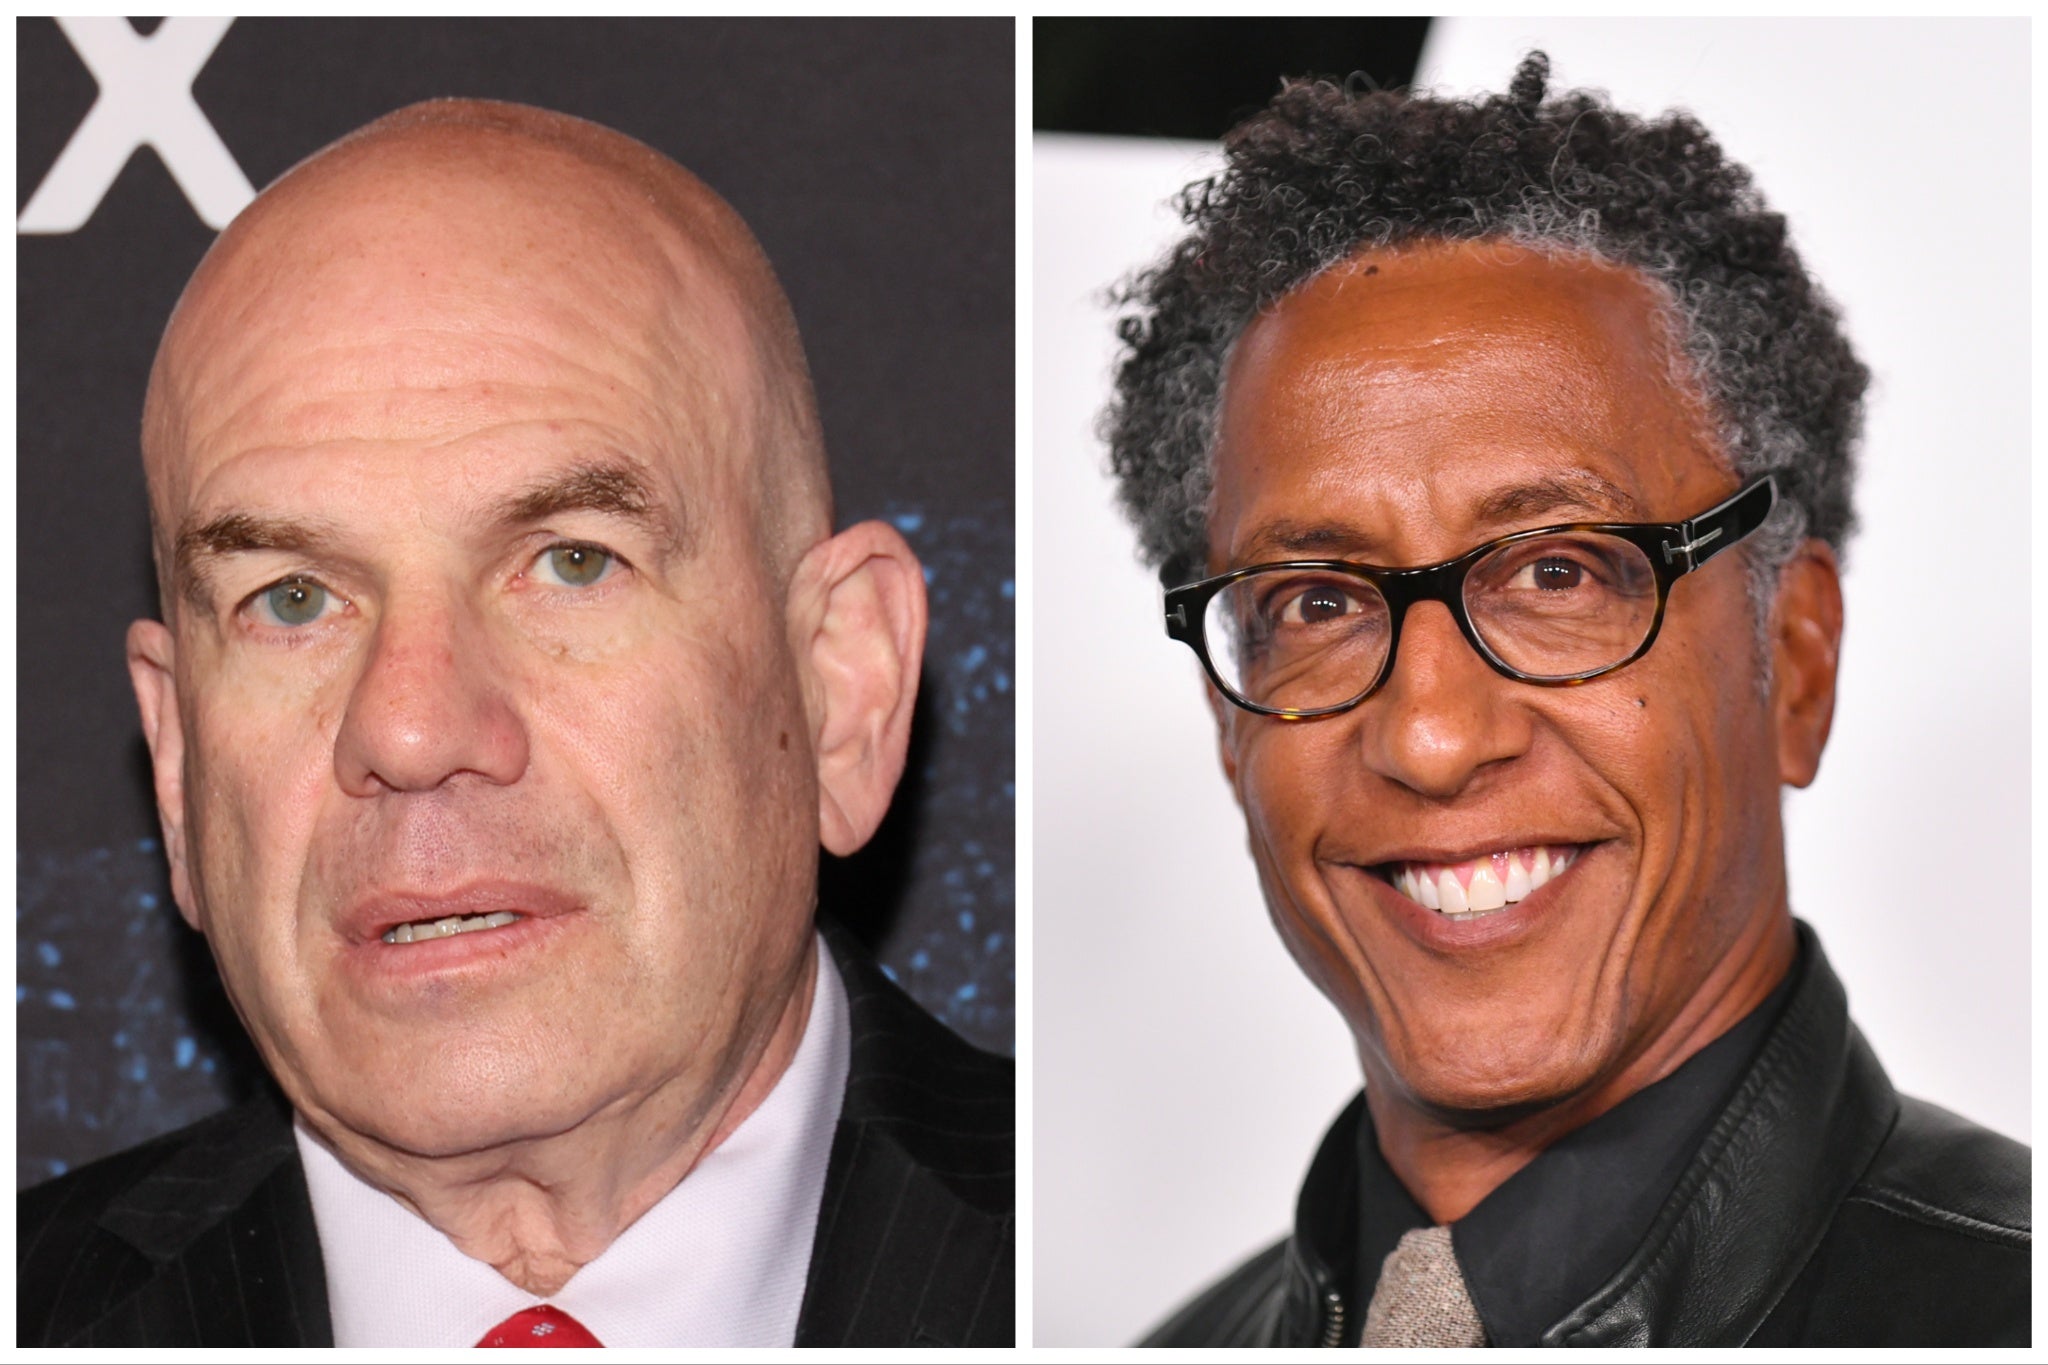 David Simon (left) and 'The Wire’ actor Andre Royo